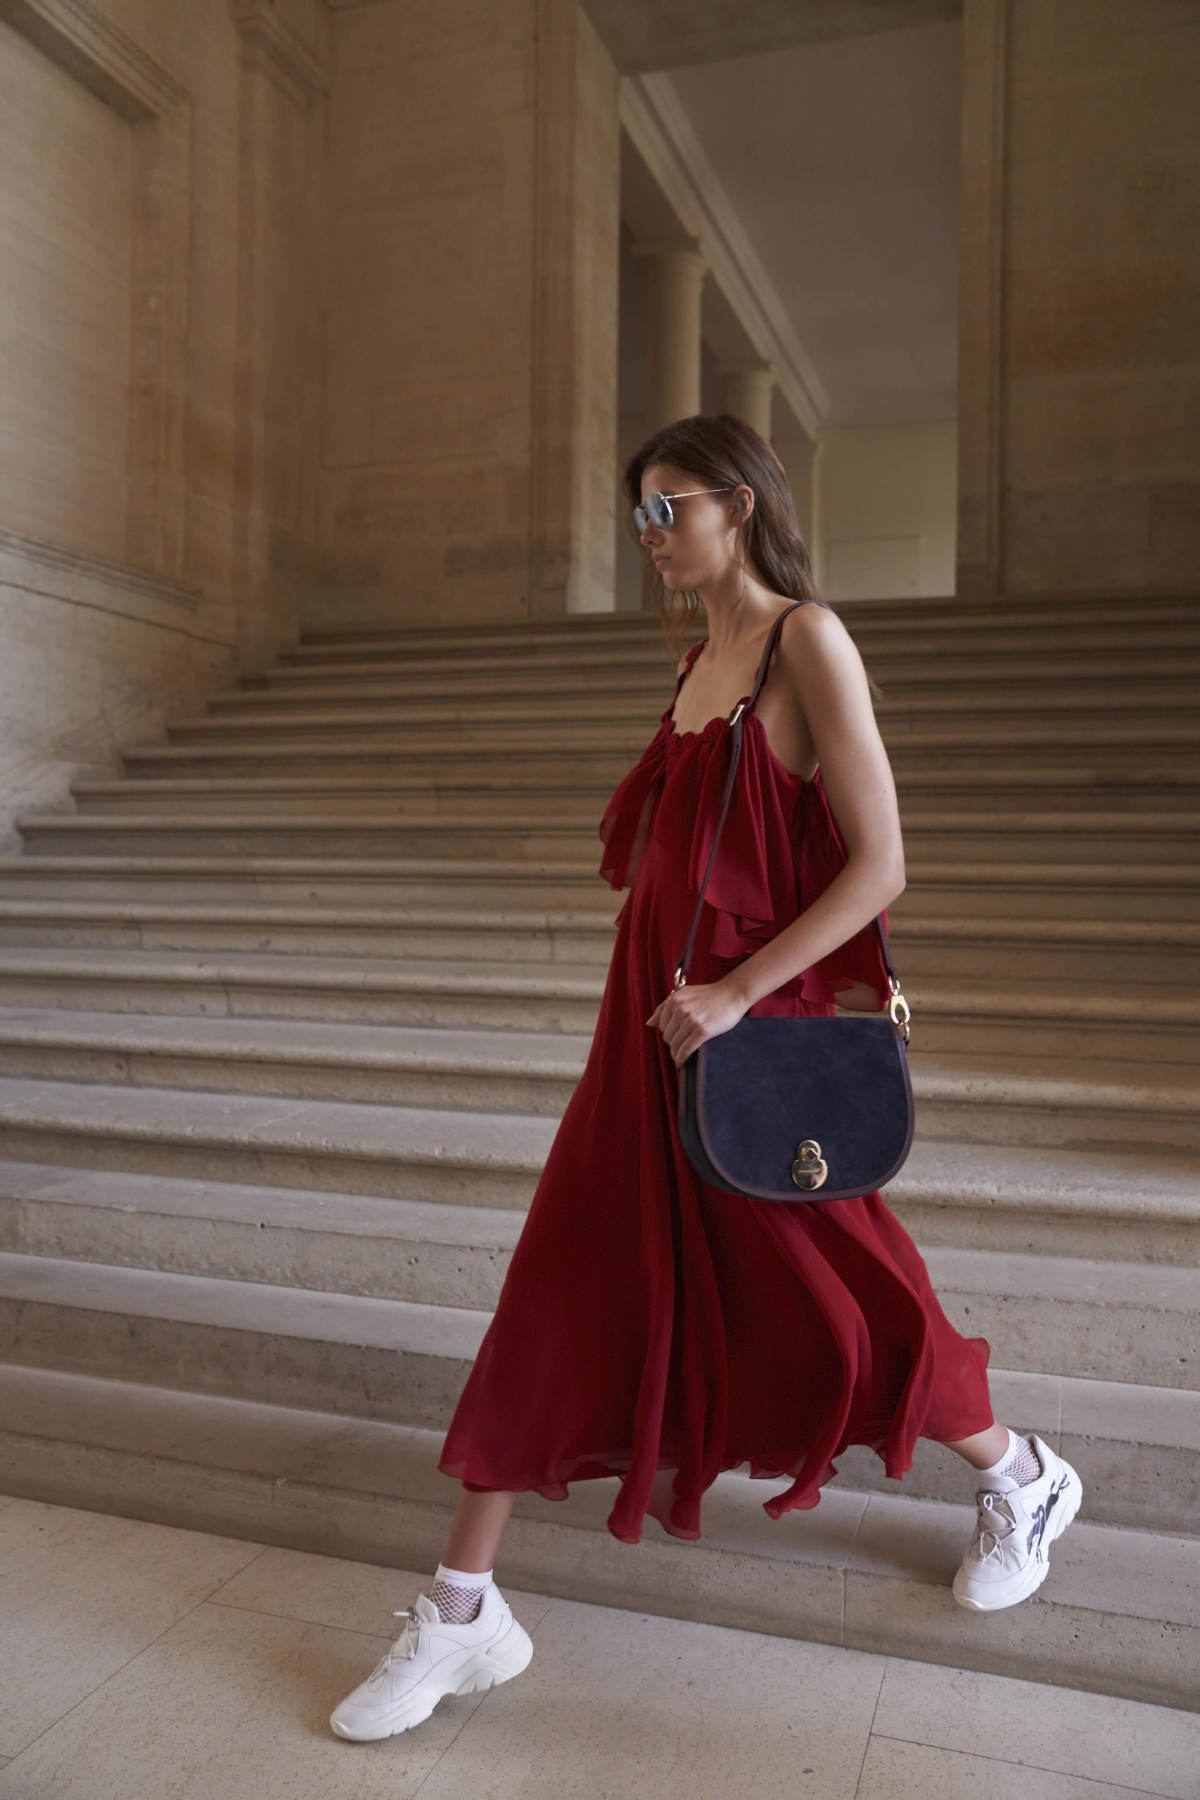 Longchamp Spring & Summer 2021 Collection - An Ode To Parisian Femininity -  Luxferity Magazine